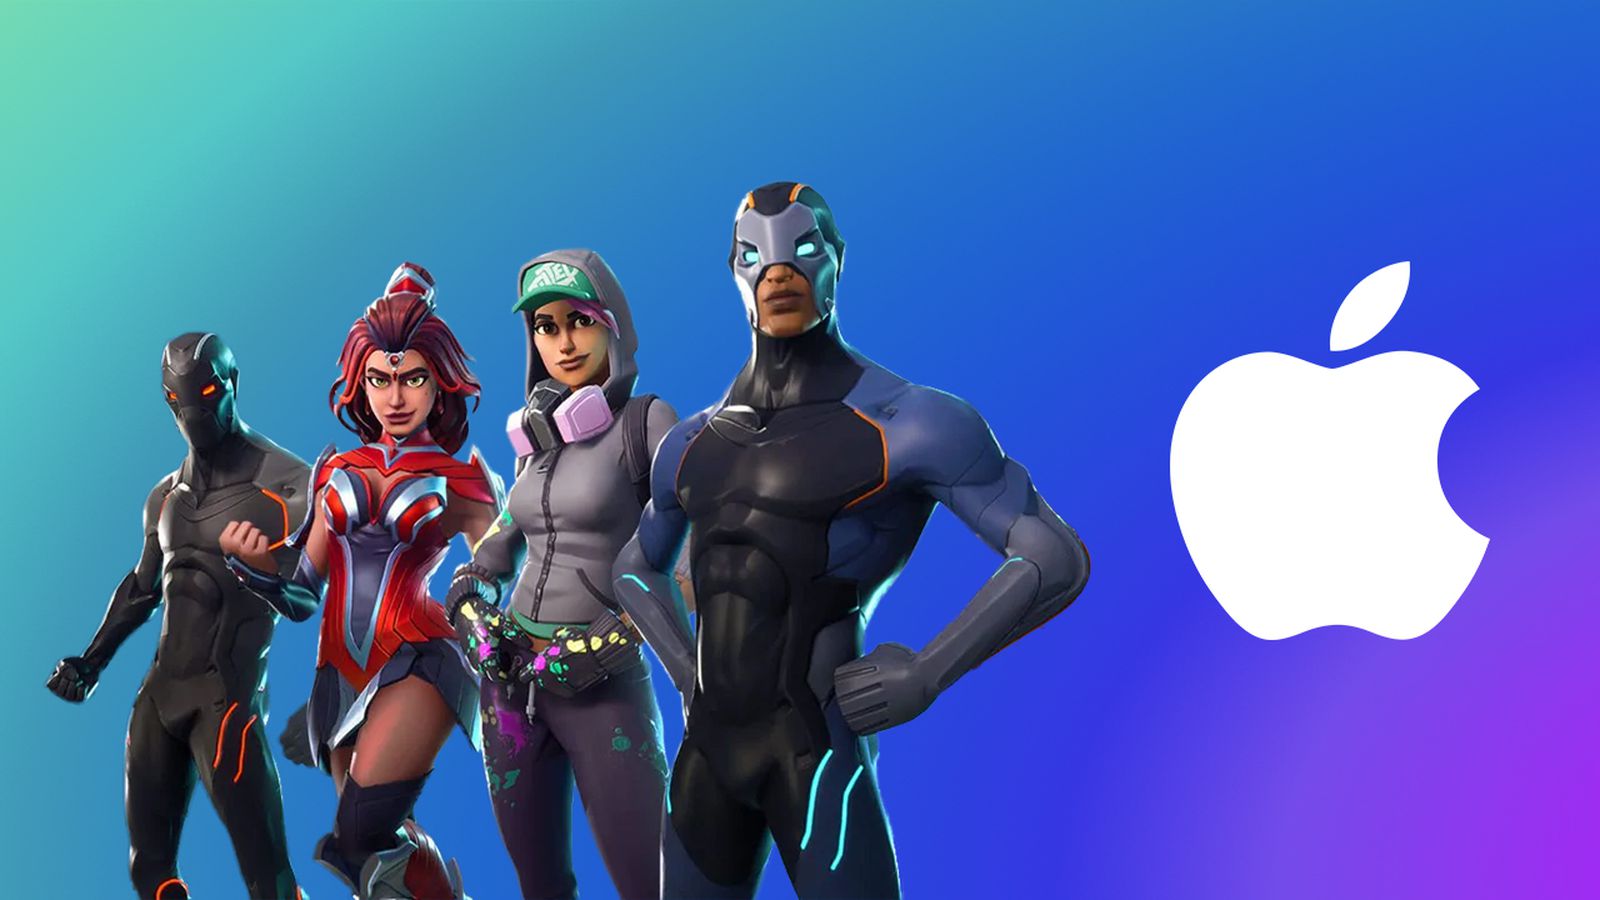 Apple filings in Epic Games cases claim to have reduced industry fees, while third-party app stores would compromise privacy and security